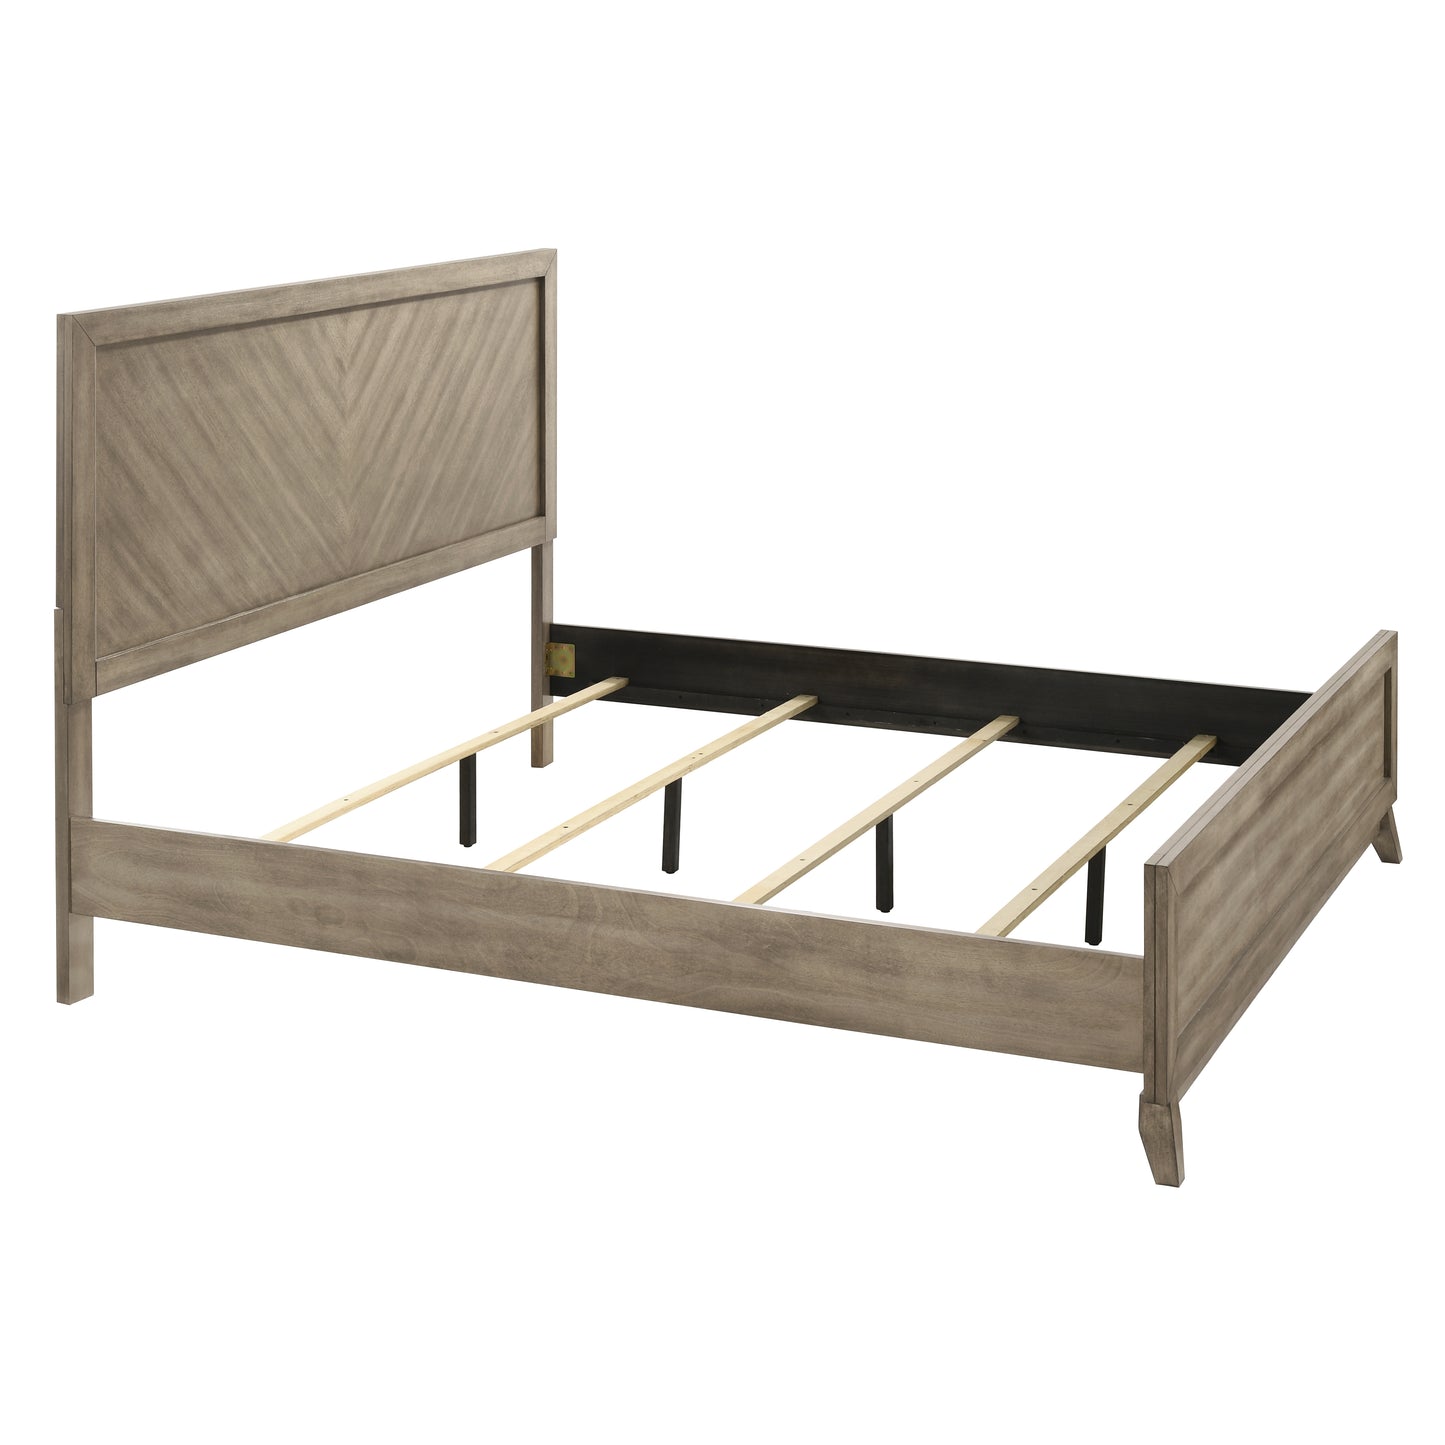 Roundhill Furniture Arena Contemporary Wood Bedroom Collection in Antique Gray